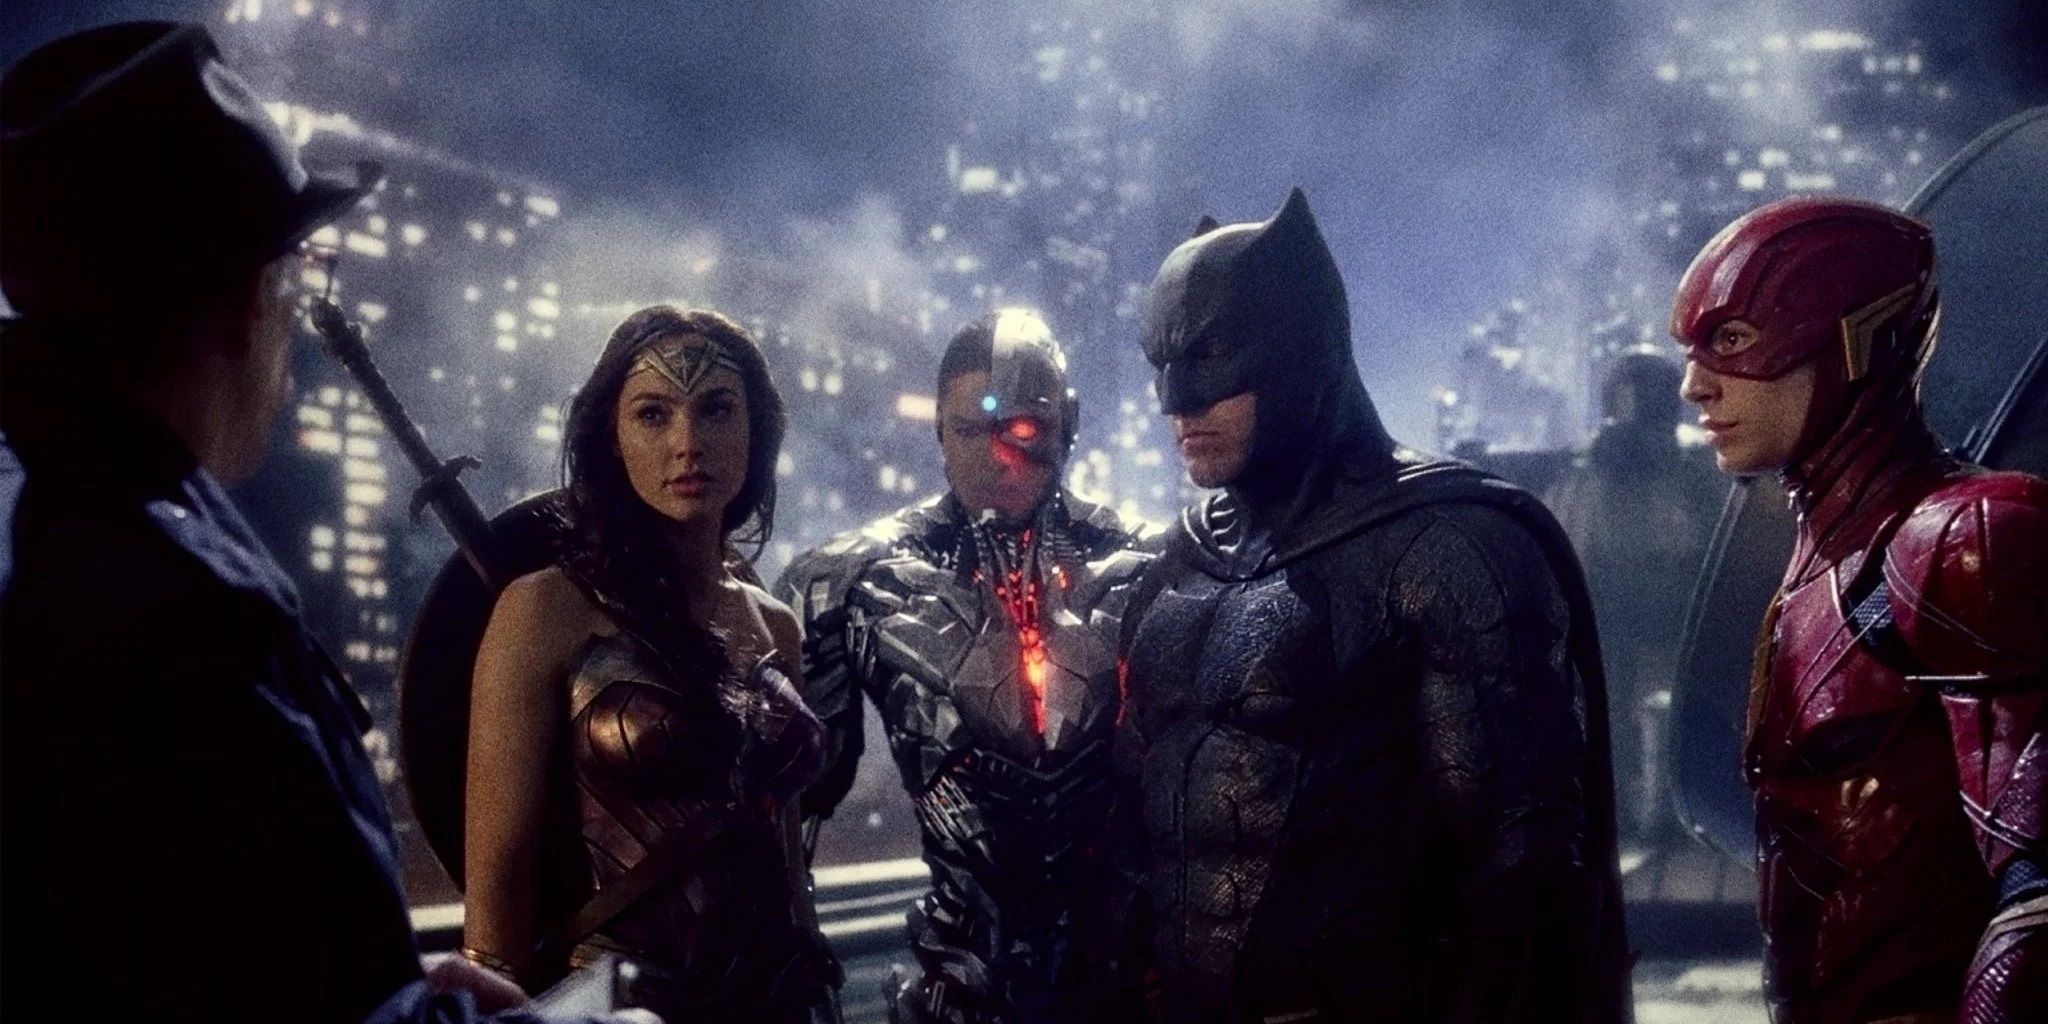 Batman, Wonder Woman, Cyborg, and the Flash in Justice League